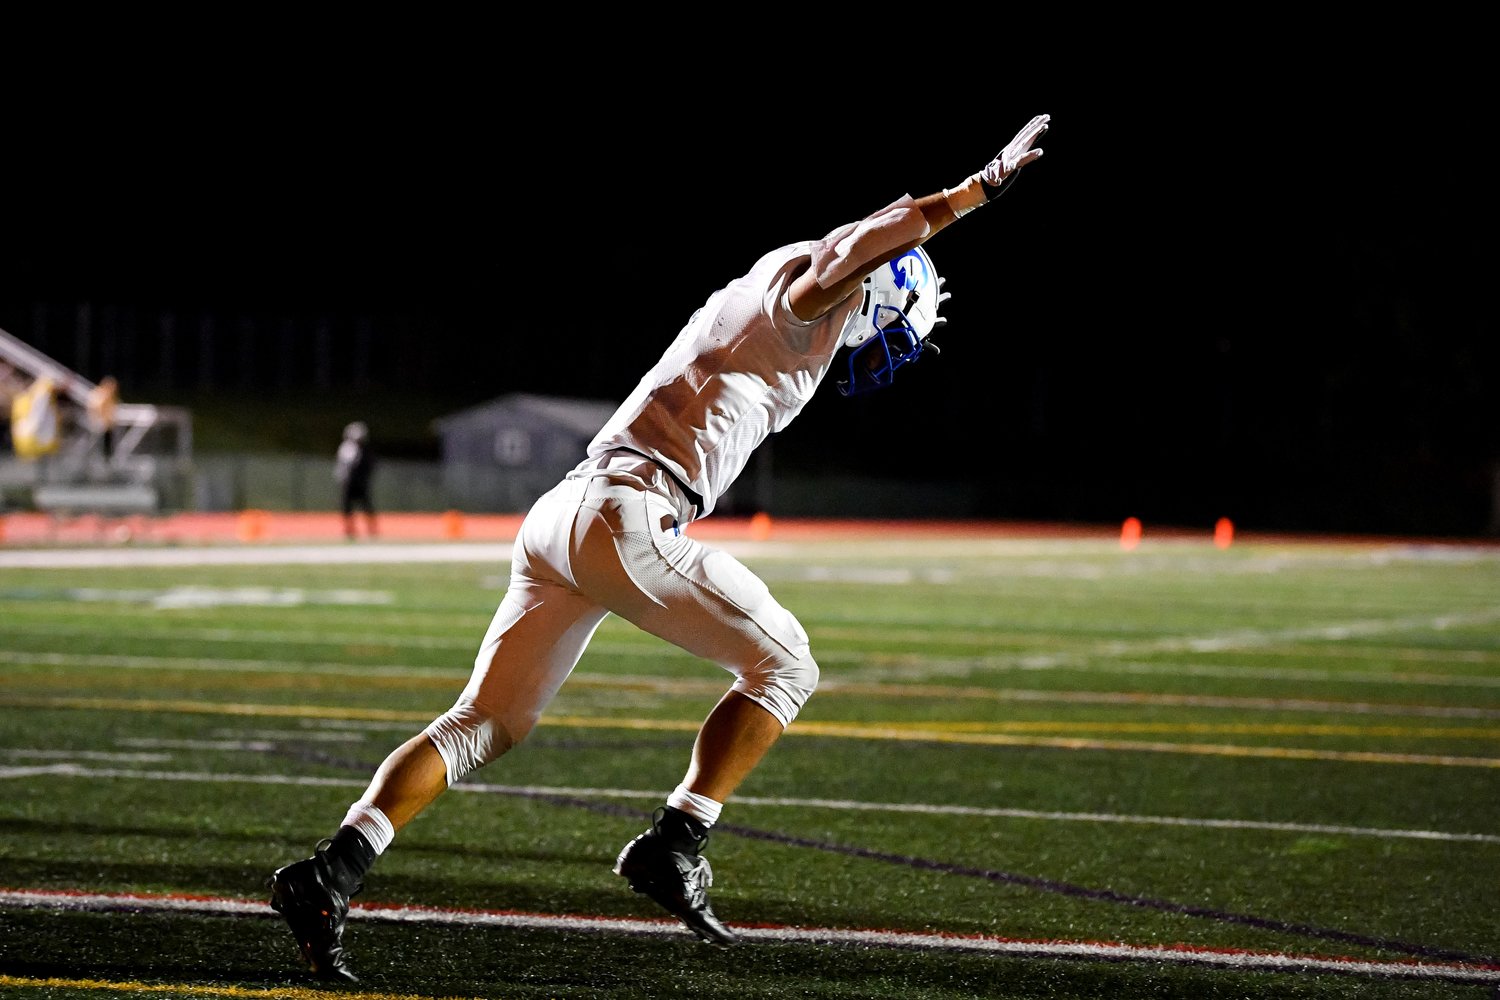 Quakertown’s John Eatherton celebrates after his second TD with a 1-yard plunge in the third quarter